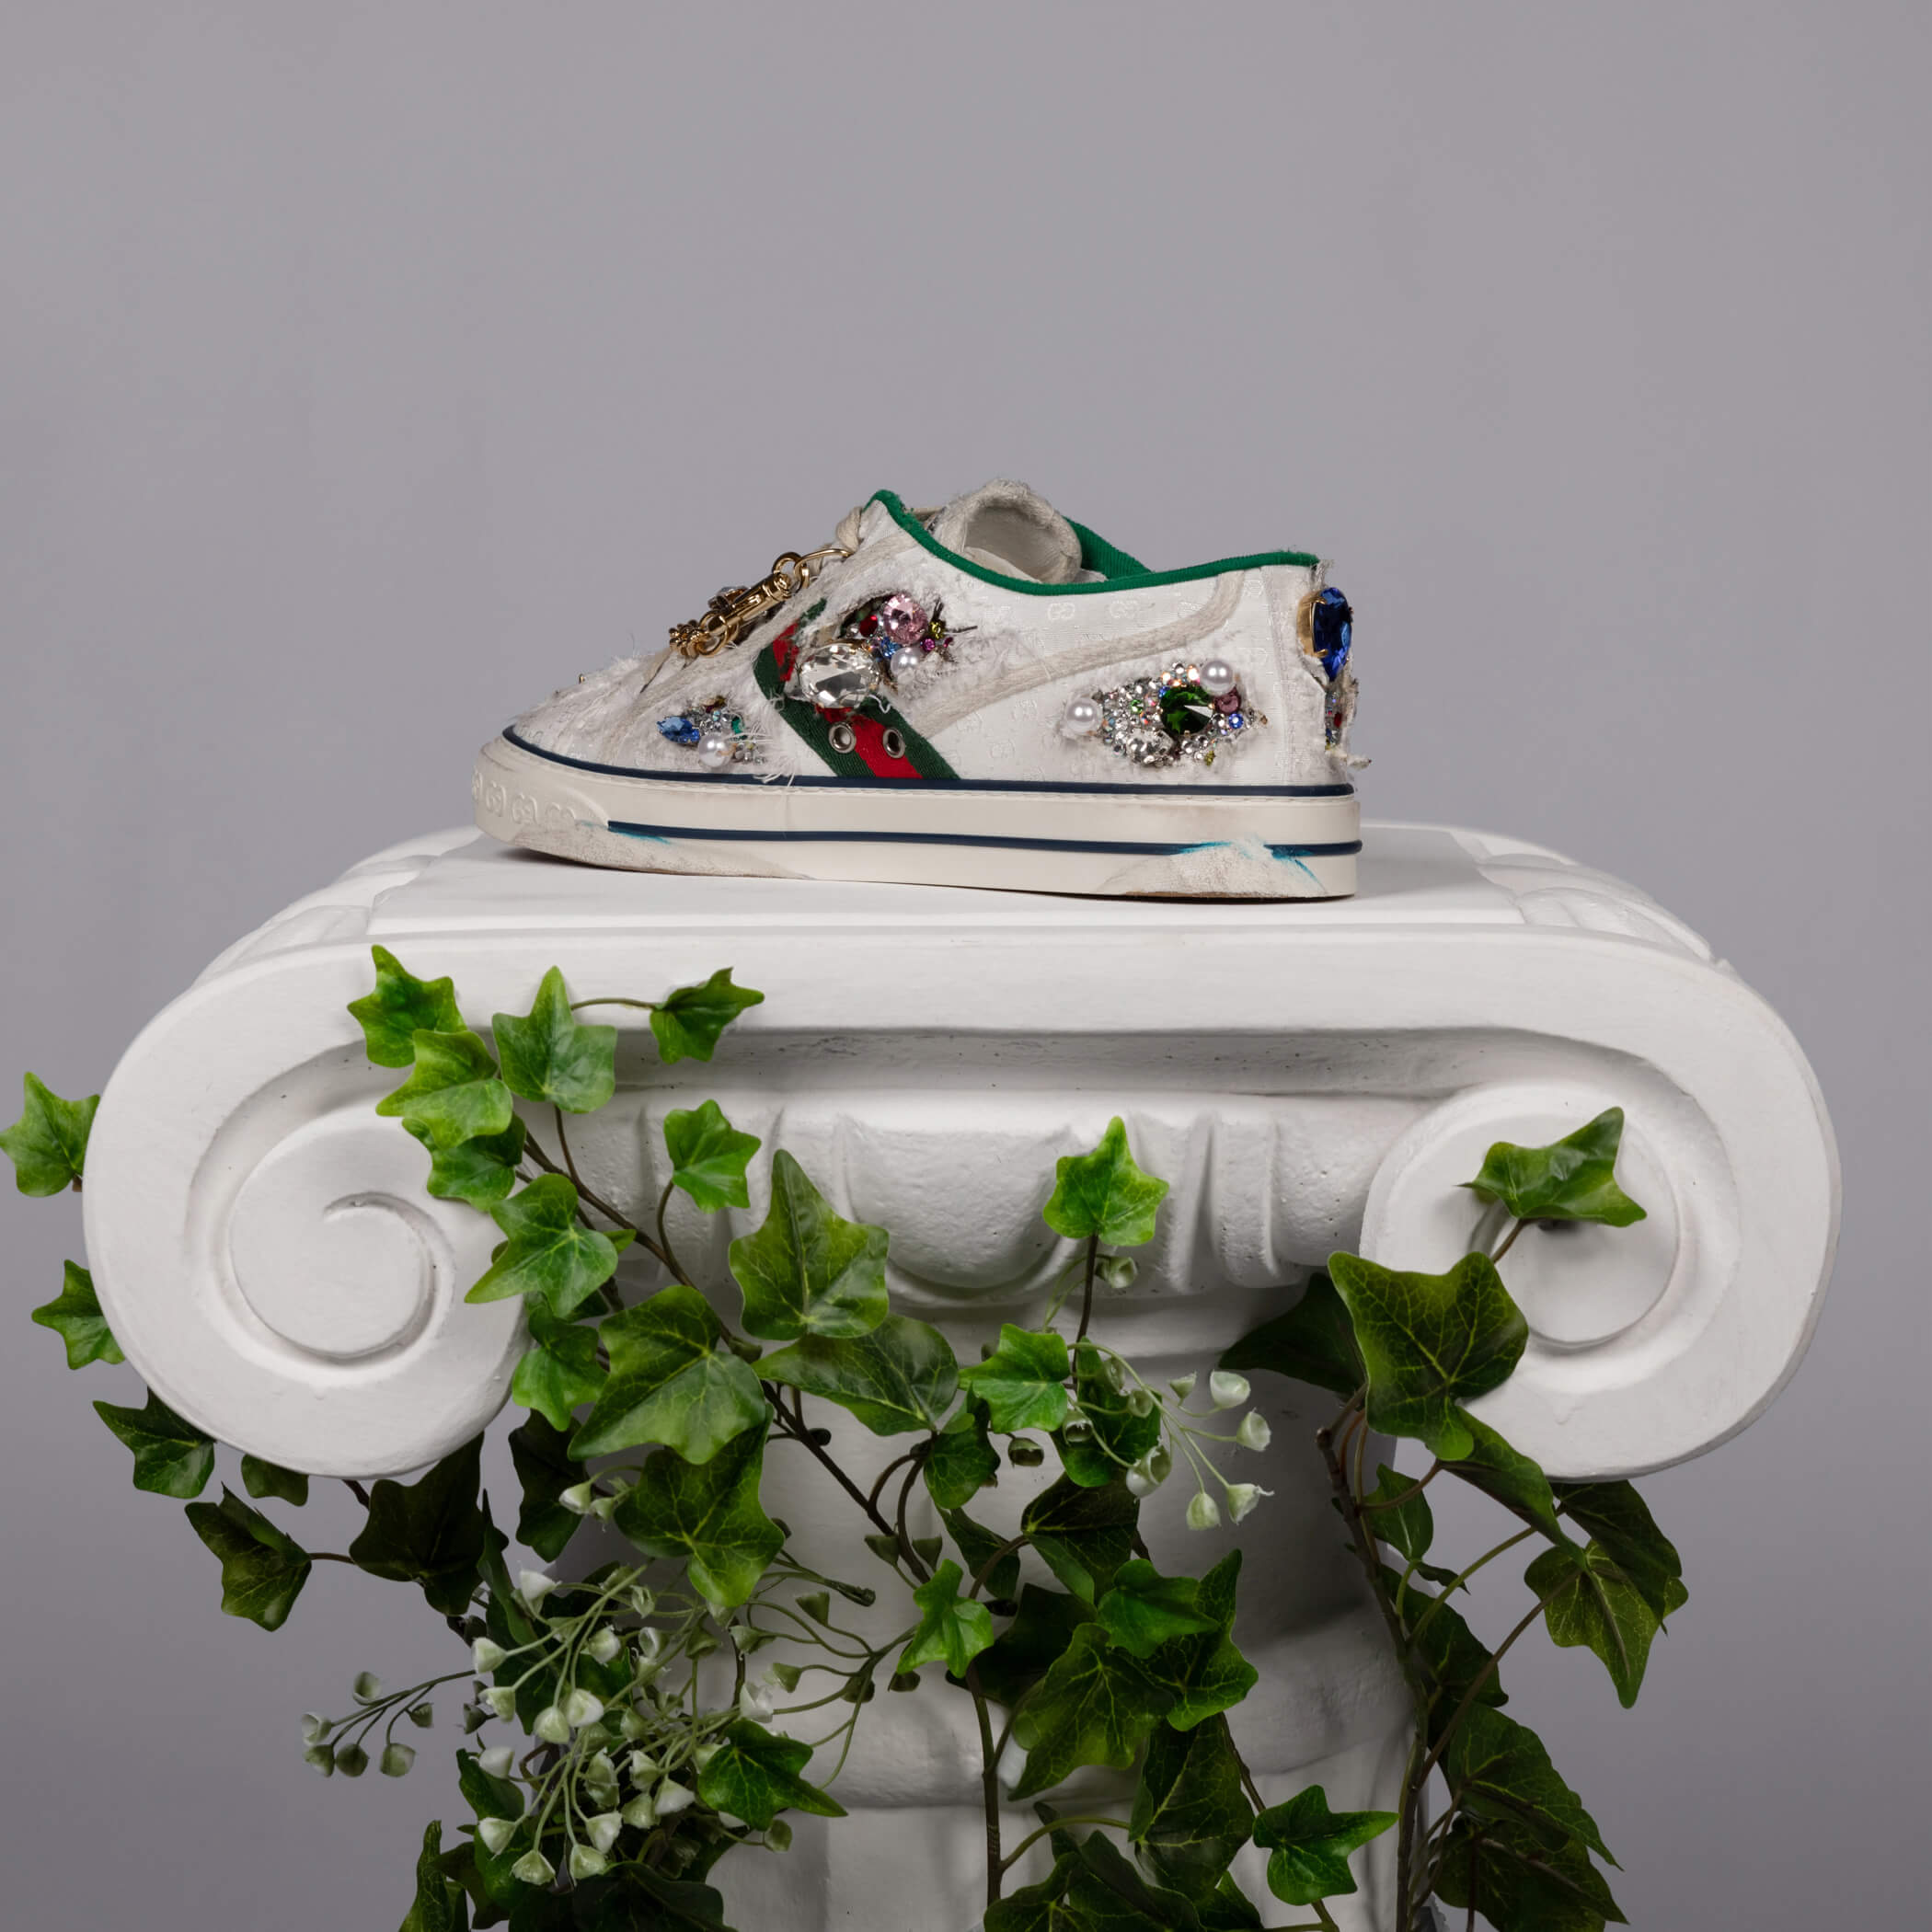 STILL_LIFE_ART_2.jpg image from GUCCI SNEAKER GARAGE RAL7000STUDIO project created on 2020-03-01